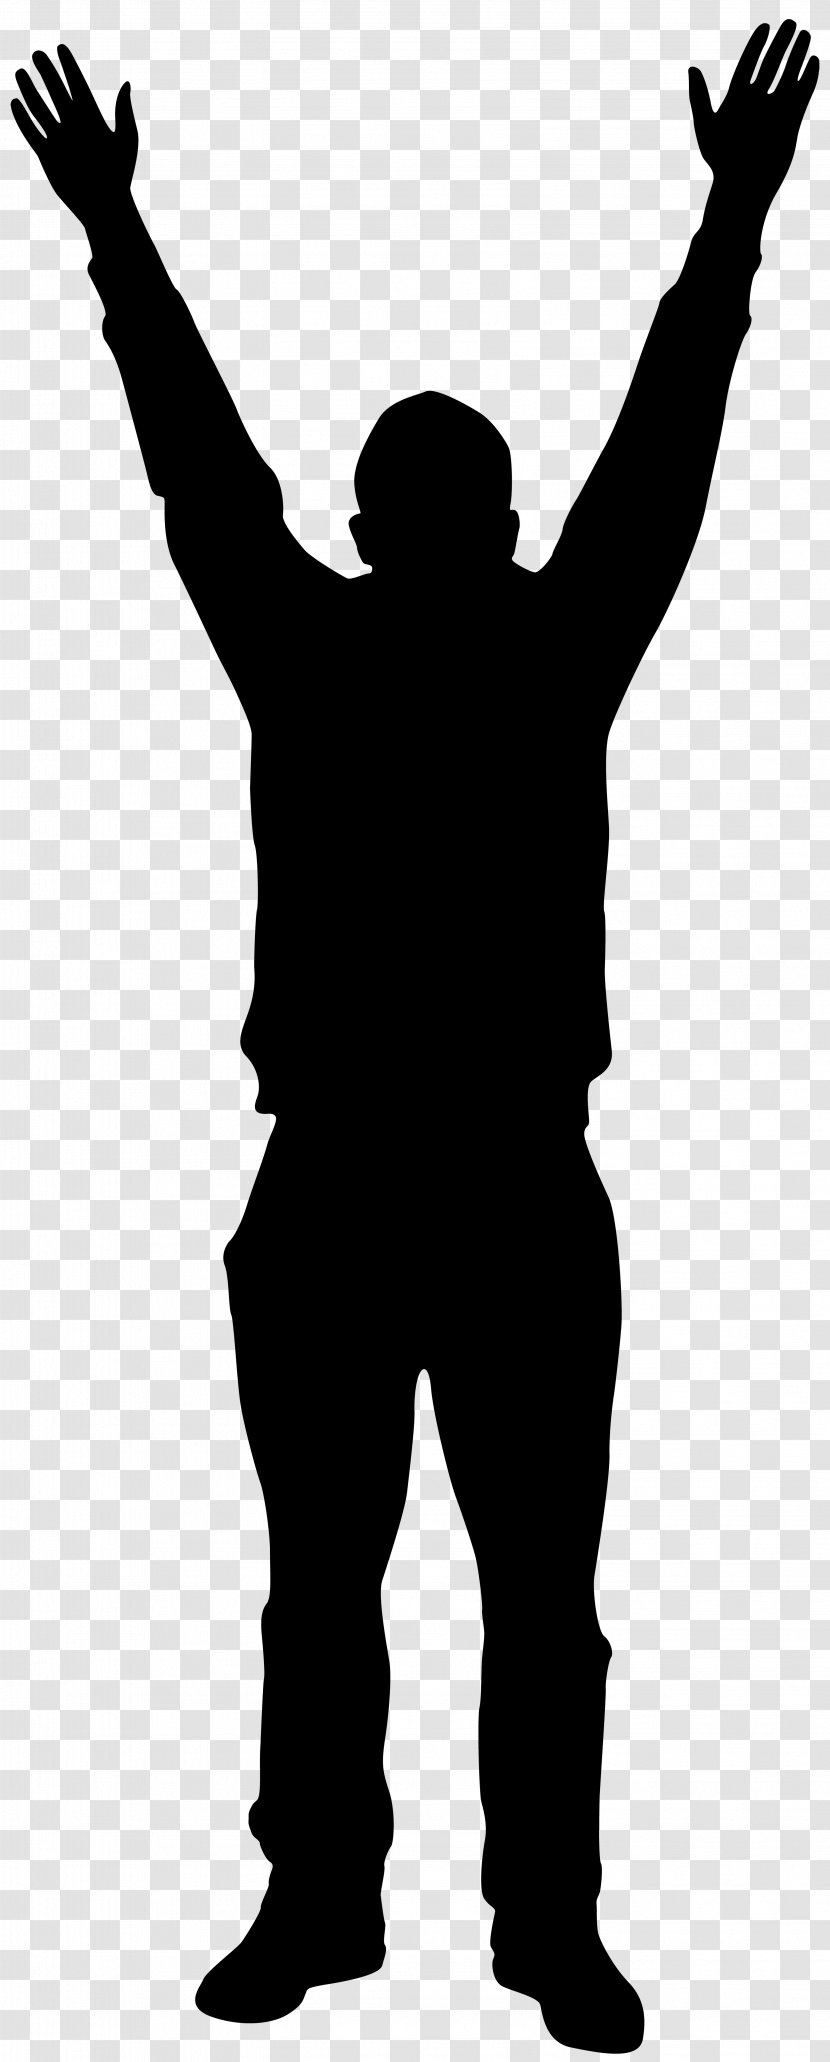 Silhouette Image Black And White Clip Art - Shadow - Gesture Transparent PNG